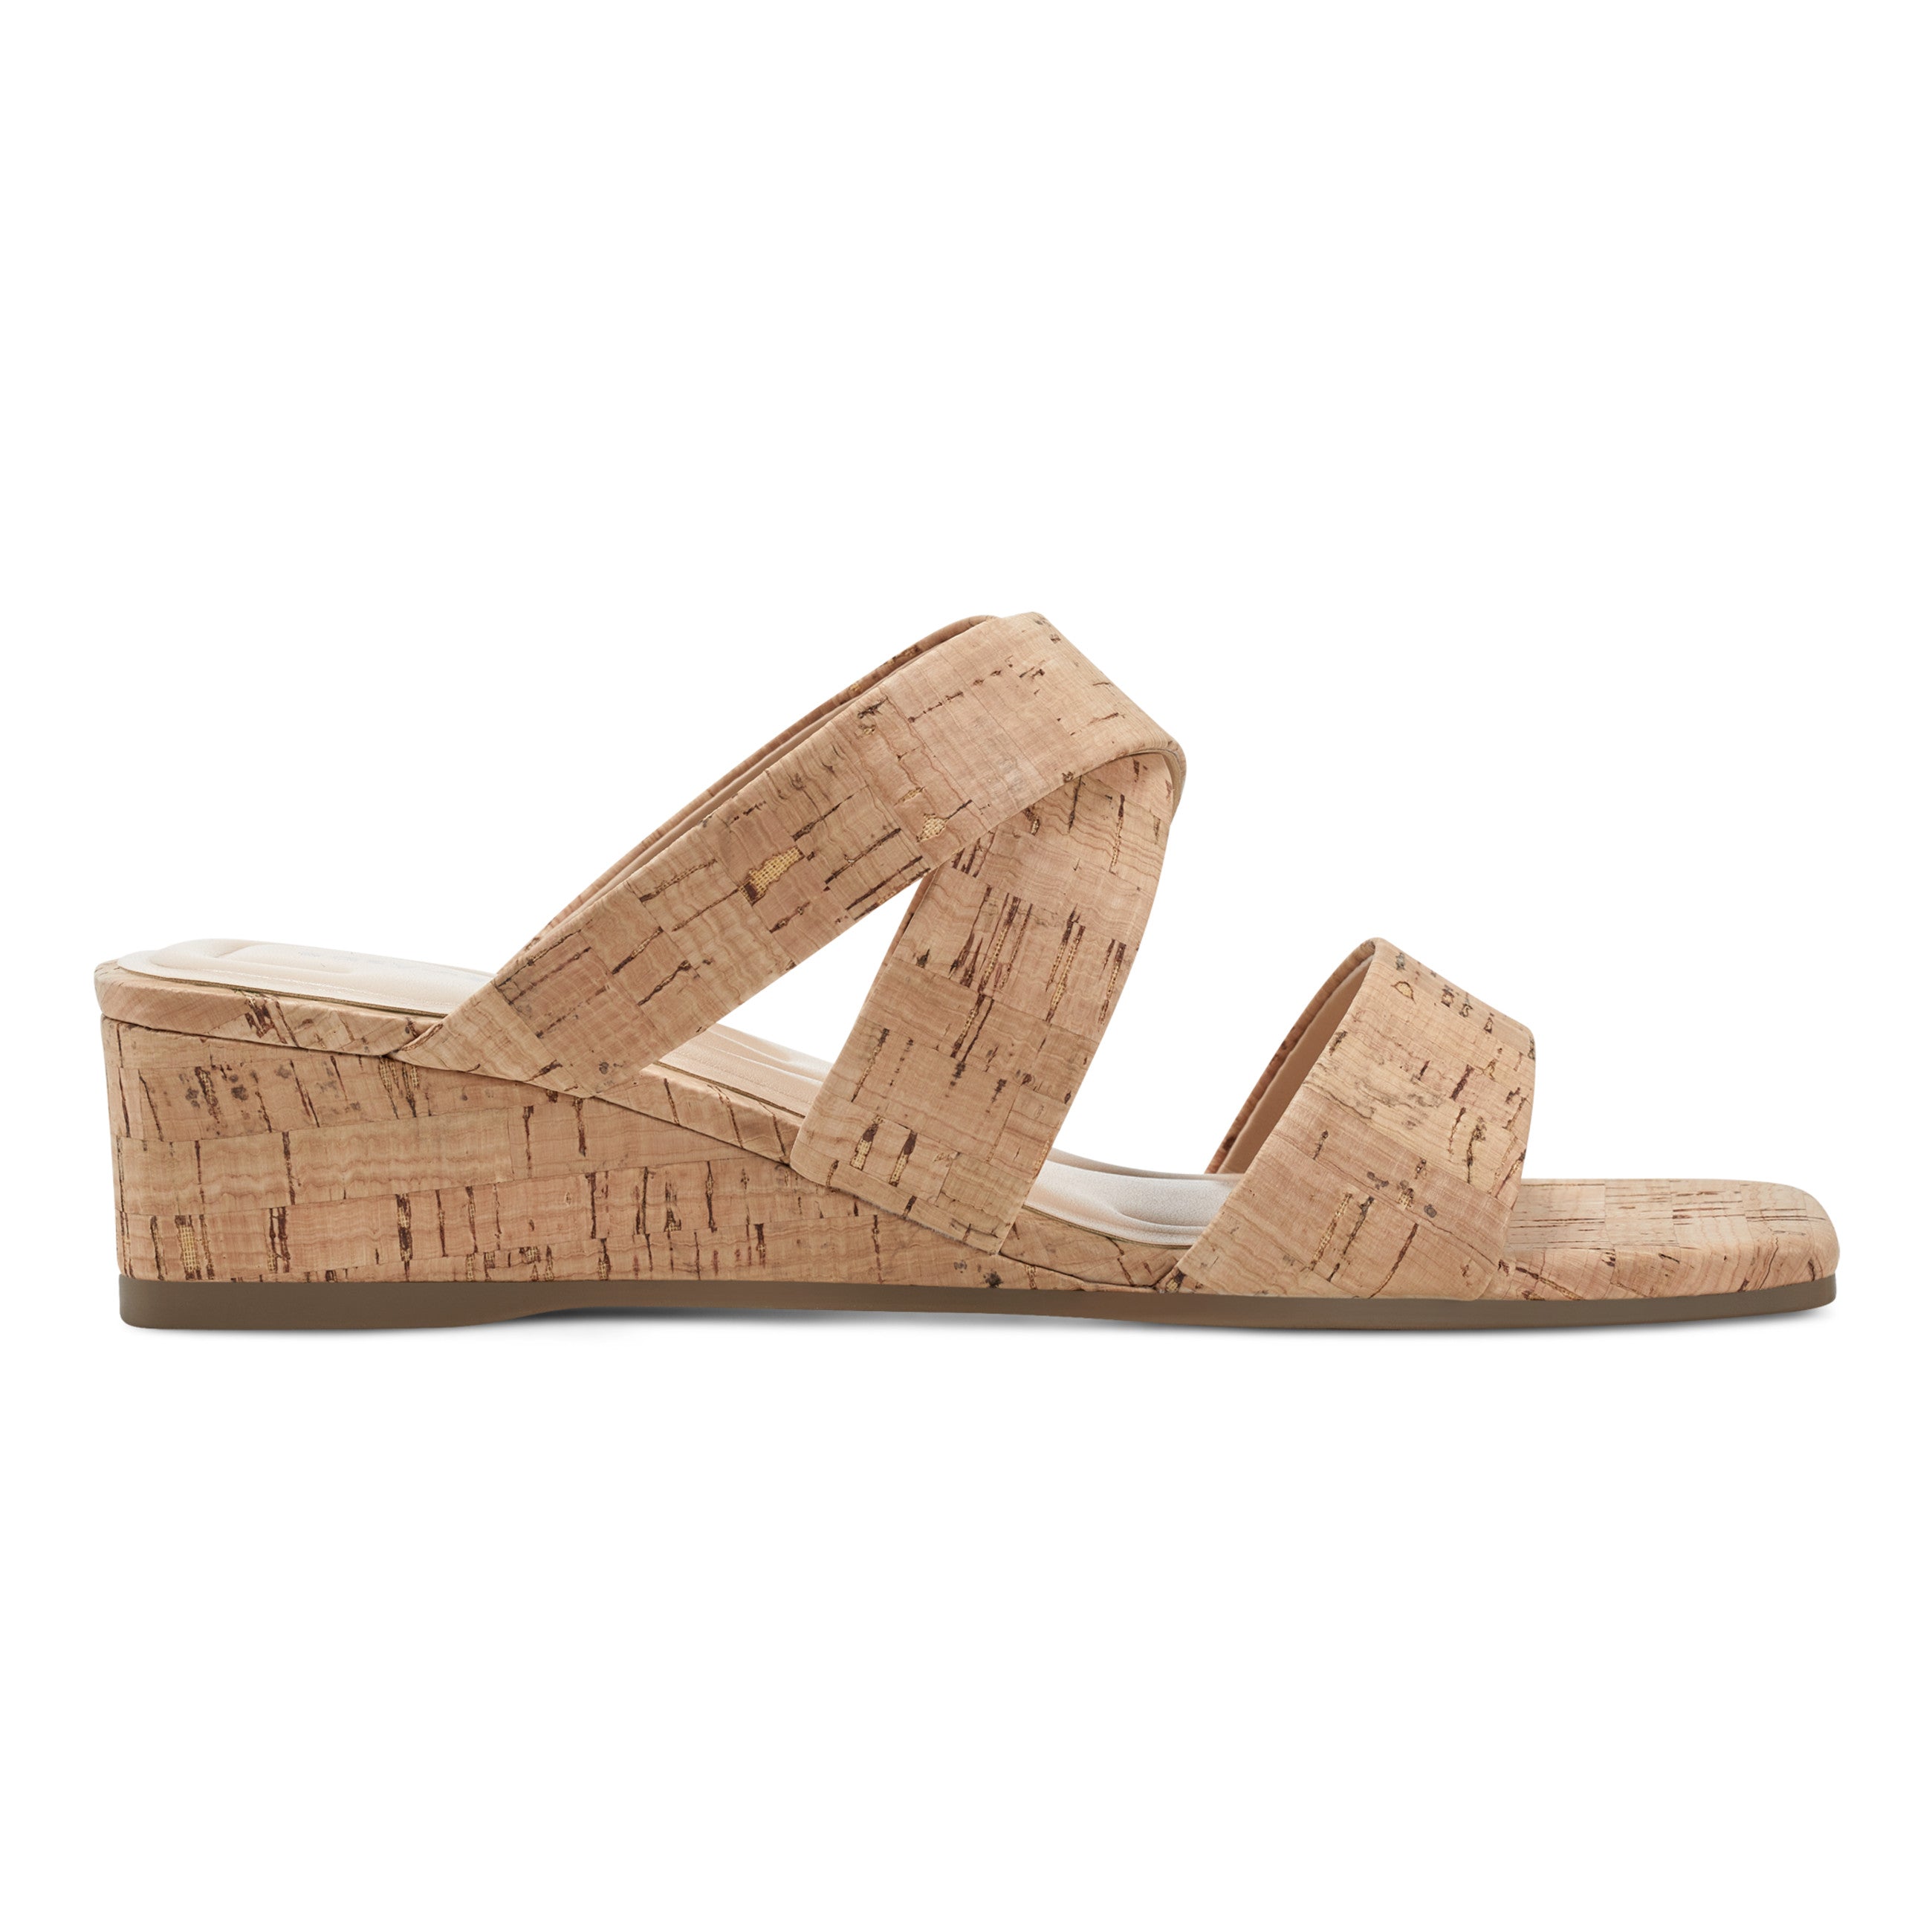 Becky Wedge Sandals